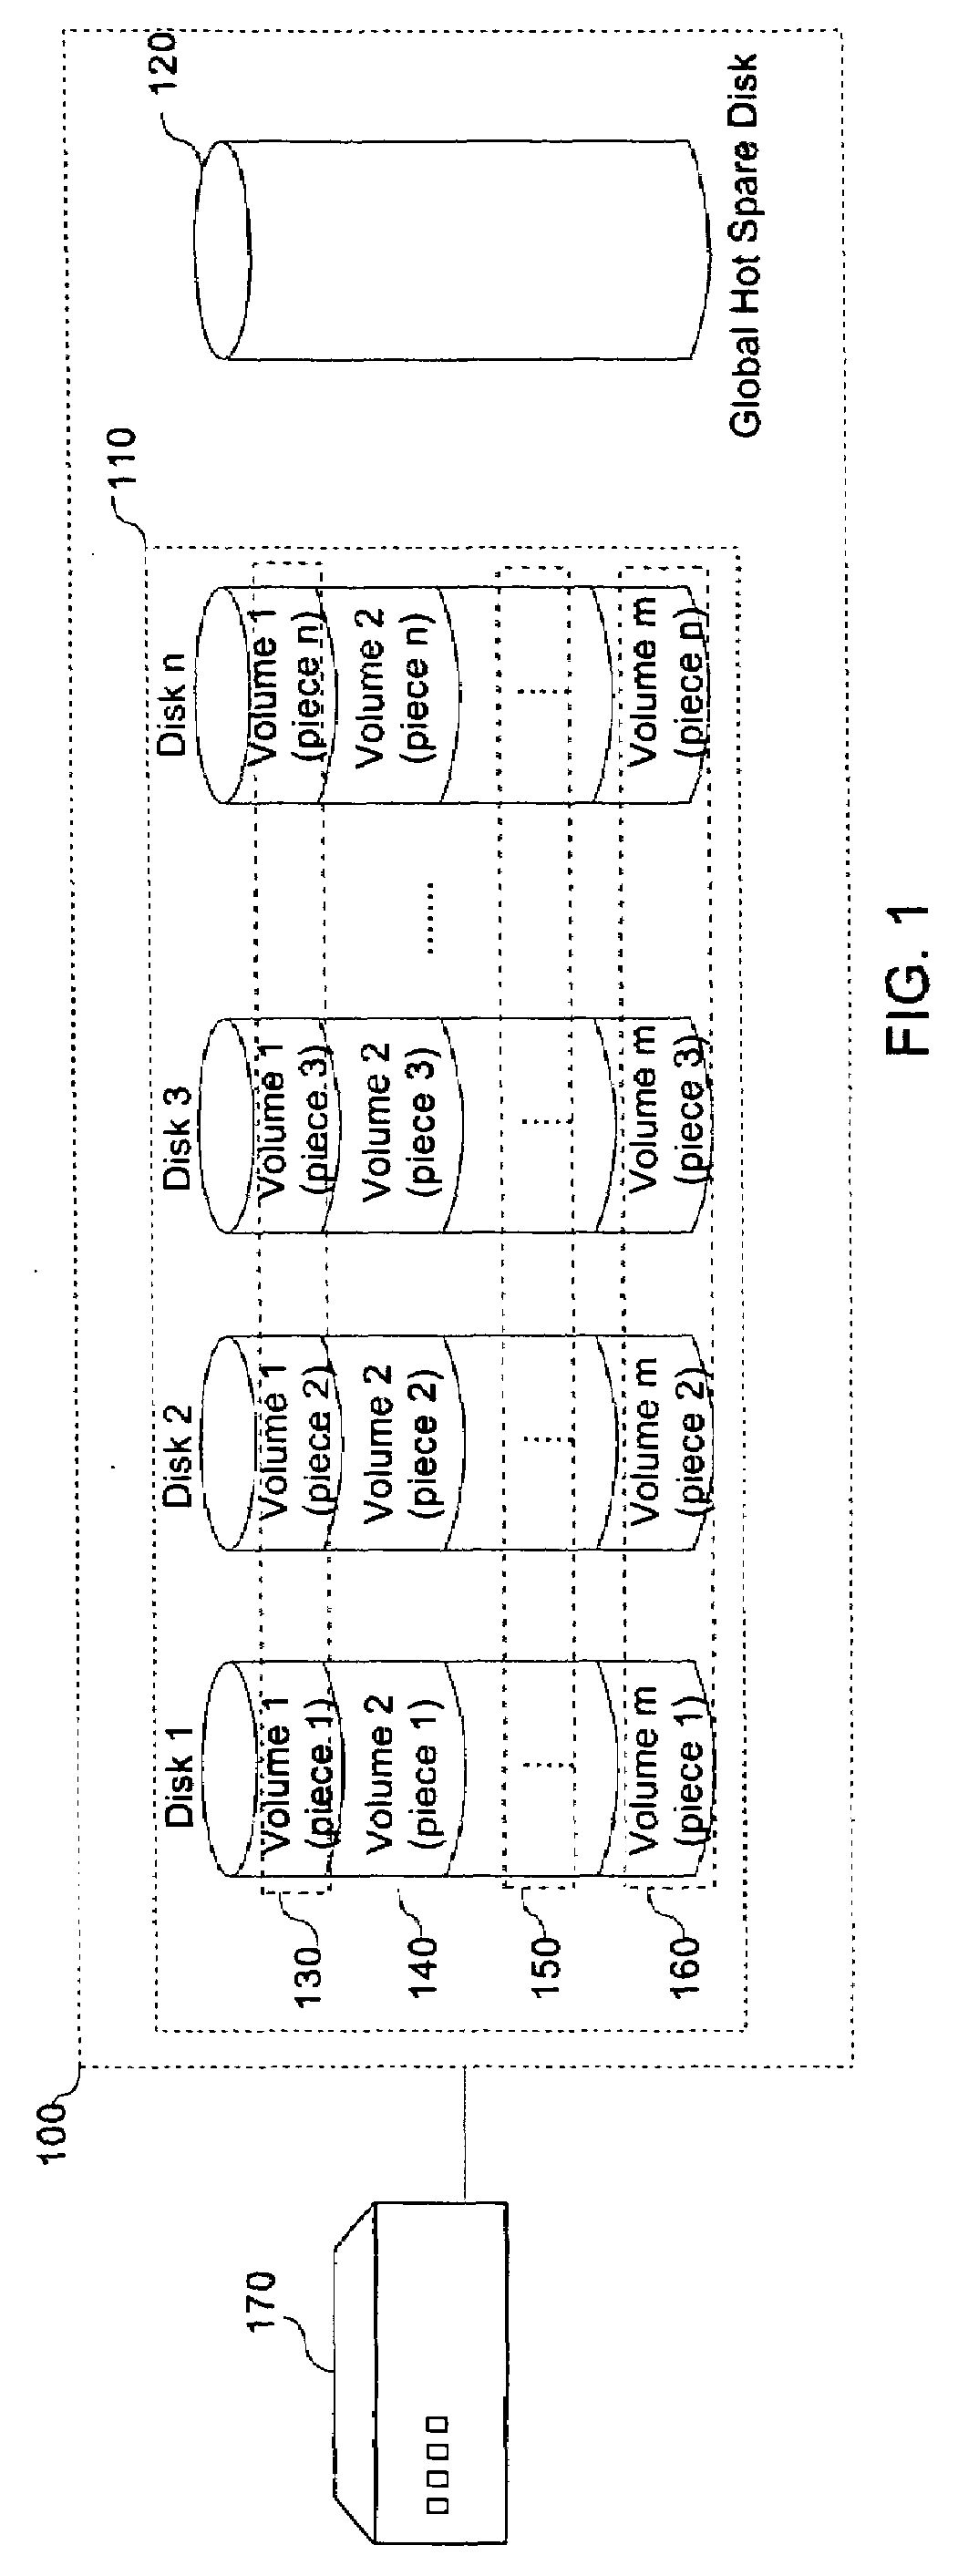 Optimized reconstruction and copyback methodology for a disconnected drive in the presence of a global hot spare disk